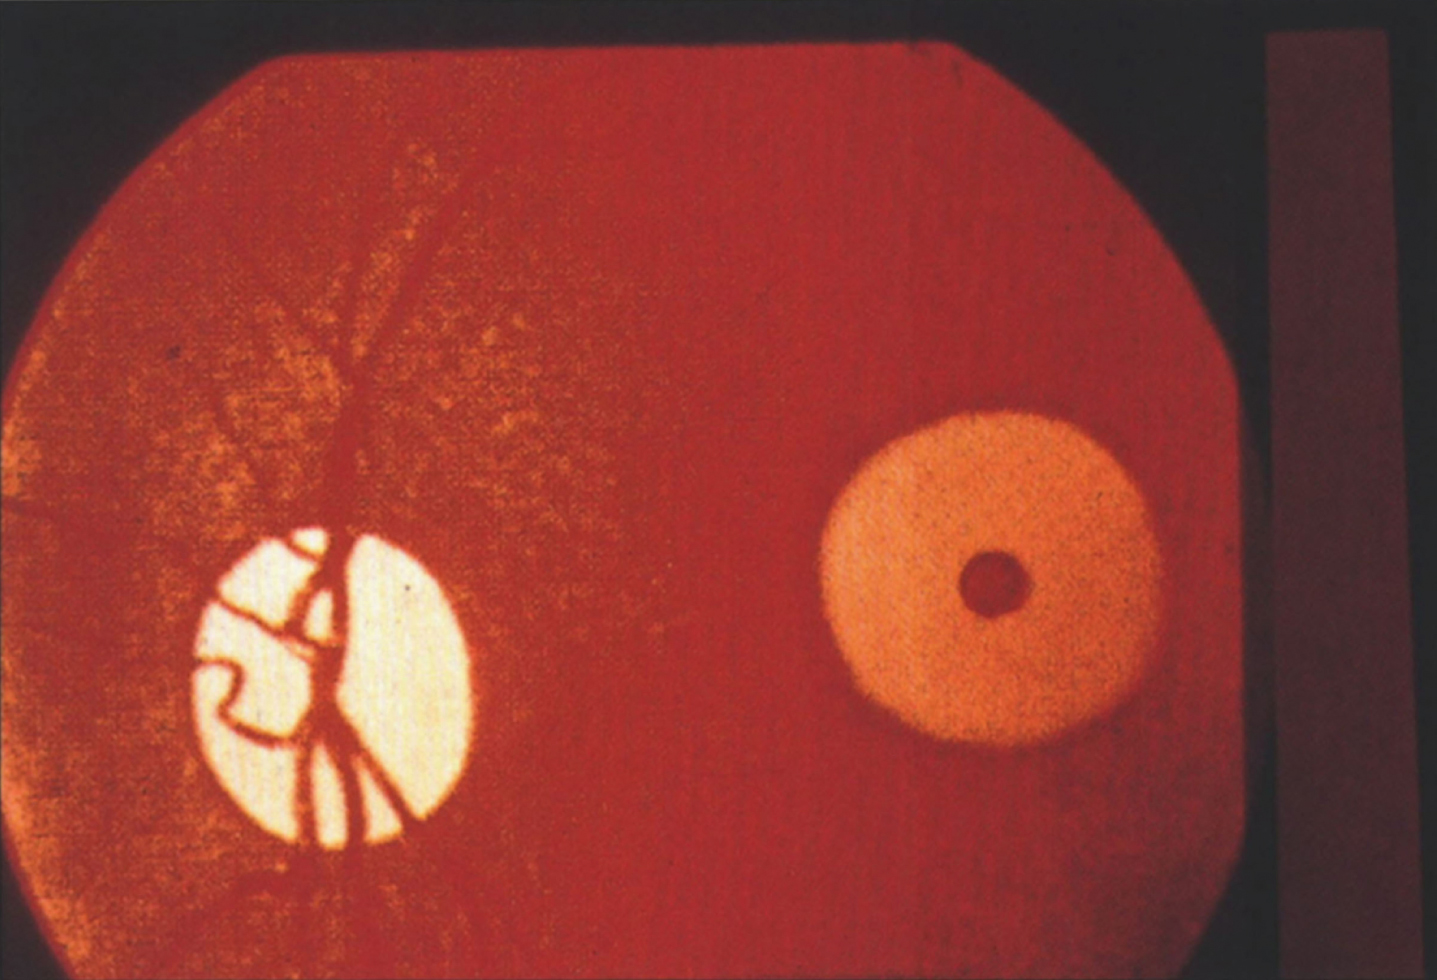 GM2 gangliosidosis type I (Tay-Sachs disease). The retina shows a cherry-red spot in the macula.